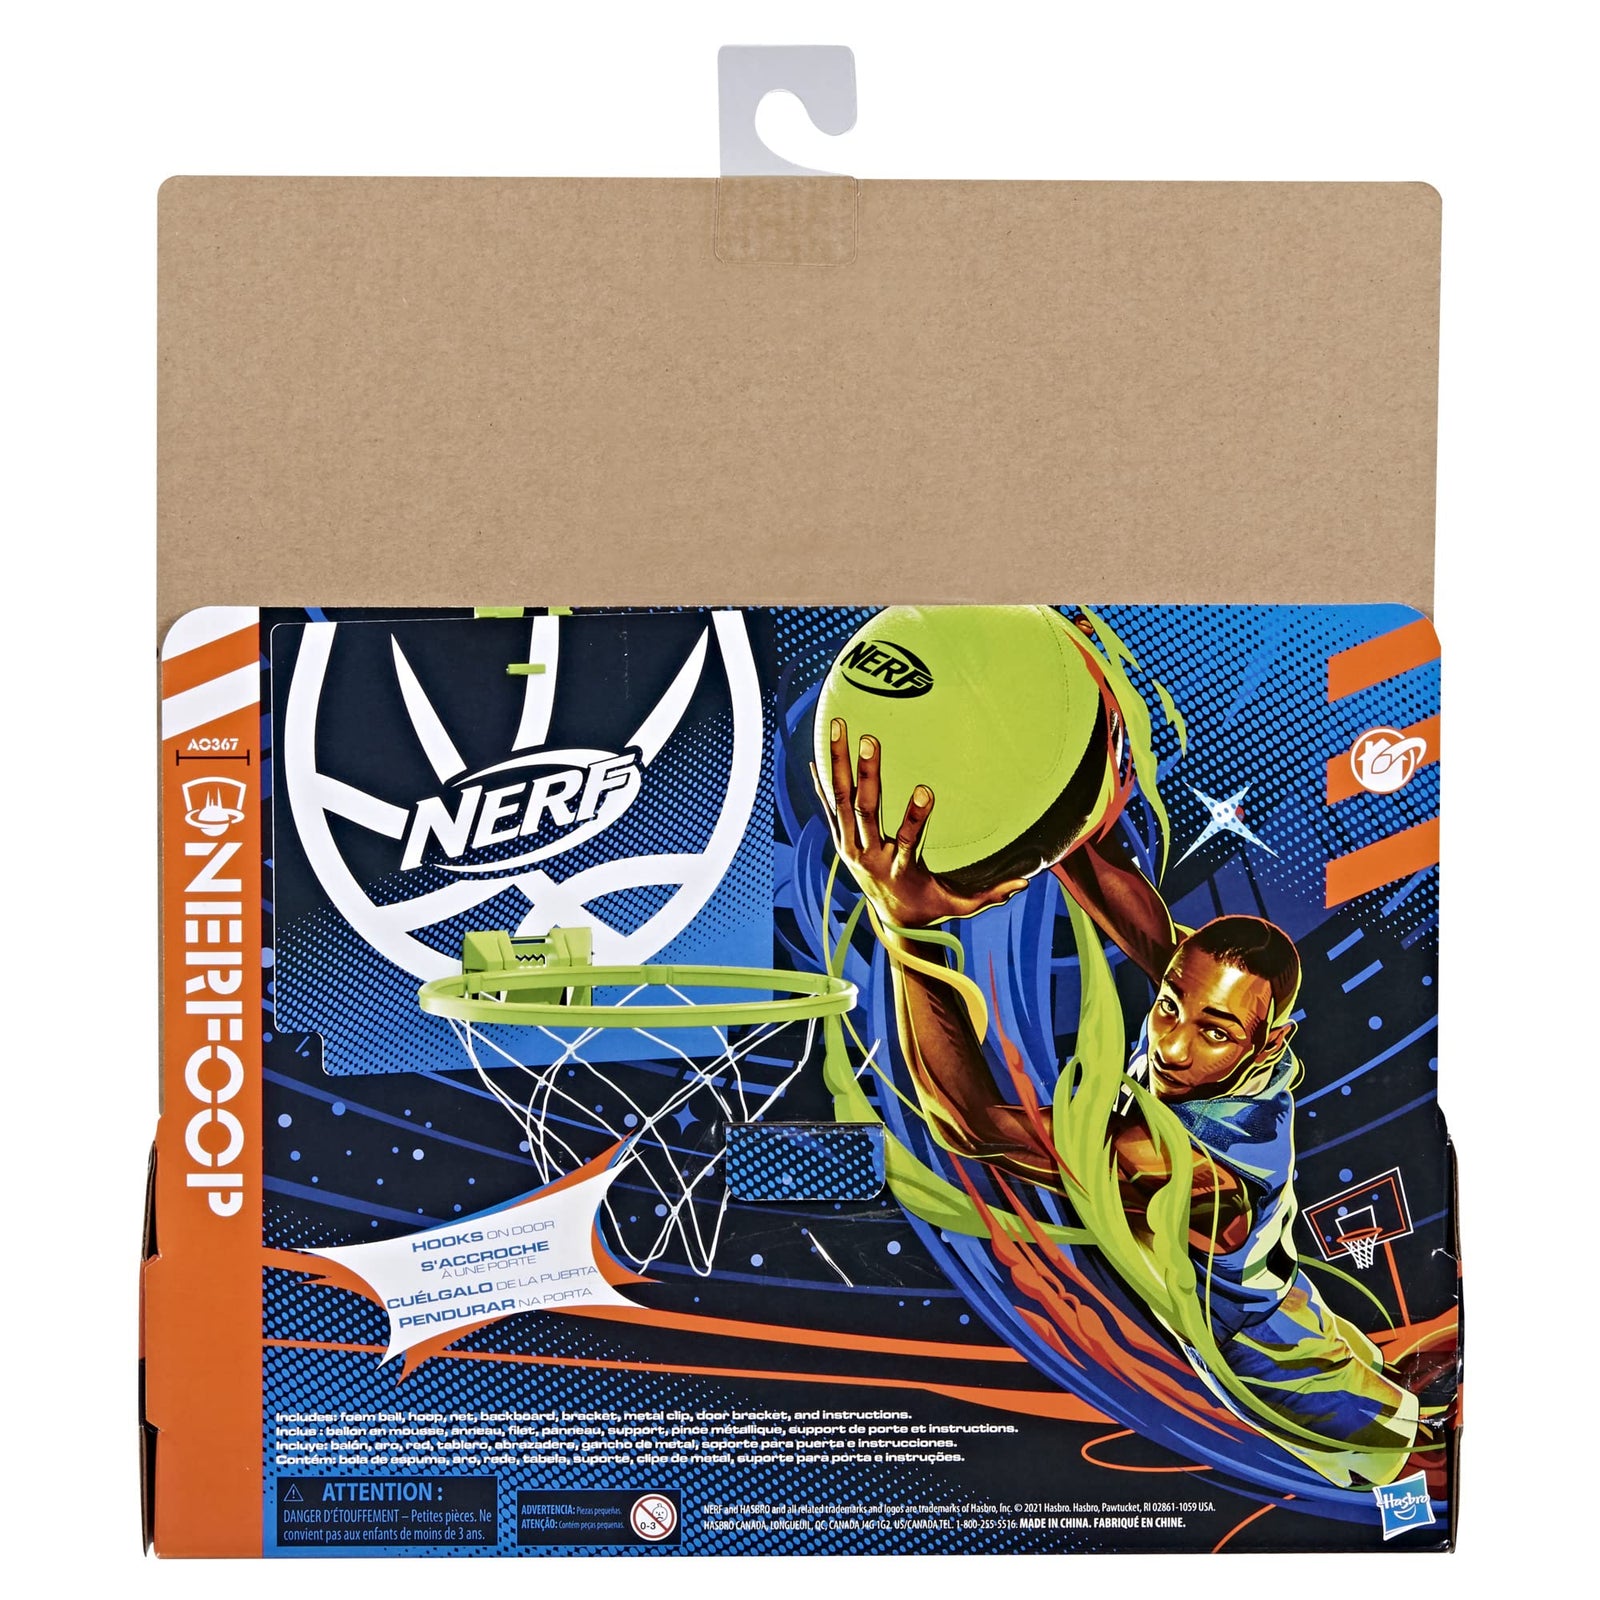 NERF Nerfoop -- The Classic Mini Foam Basketball and Hoop -- Hooks On Doors -- Indoor and Outdoor Play -- A Favorite Since 1972 , Blue